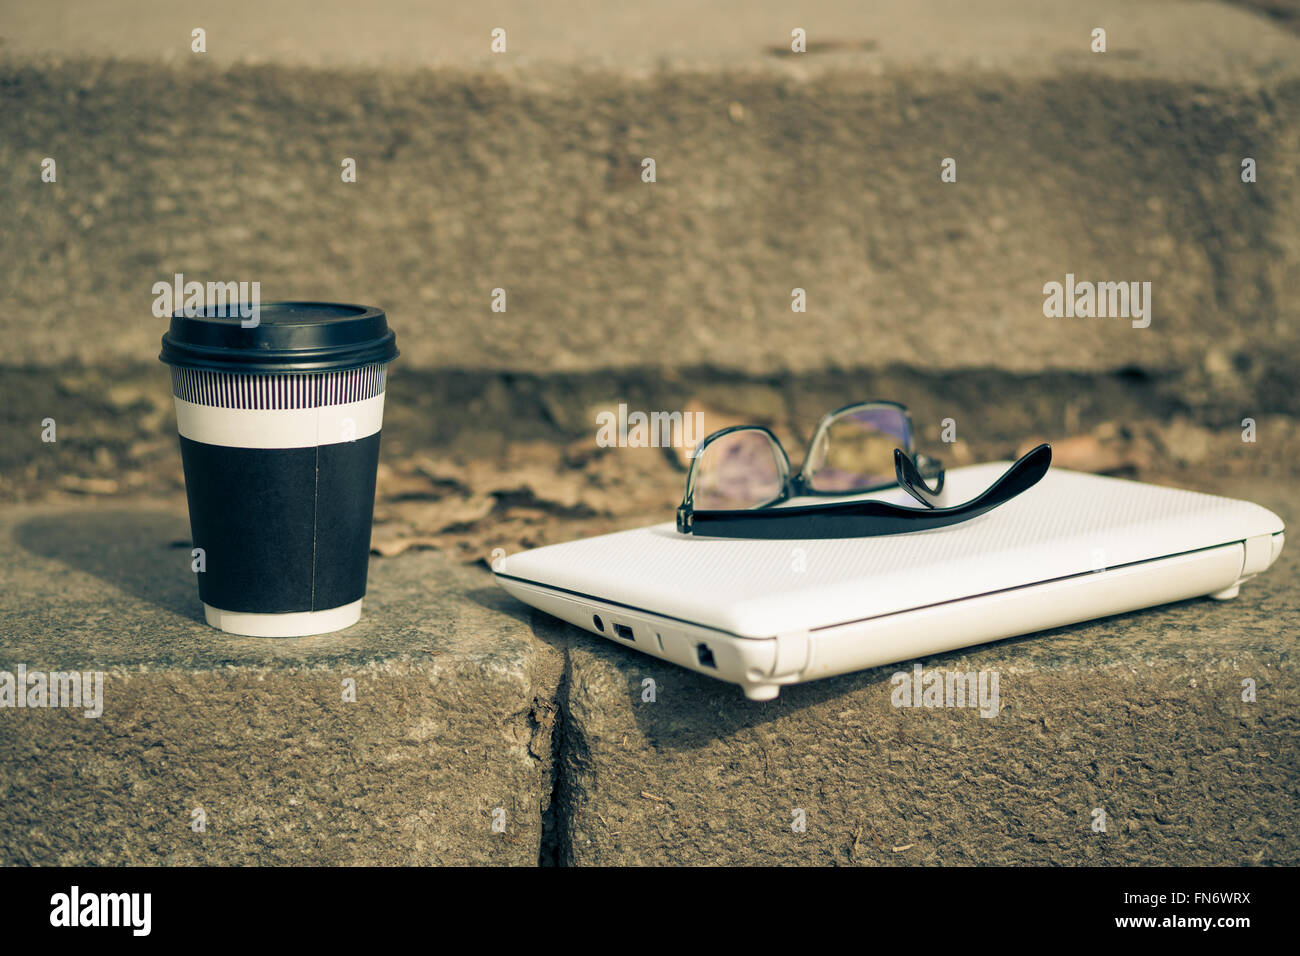 Mug of coffee with white laptop and protective glasses on the steps. Warm color toned image Stock Photo